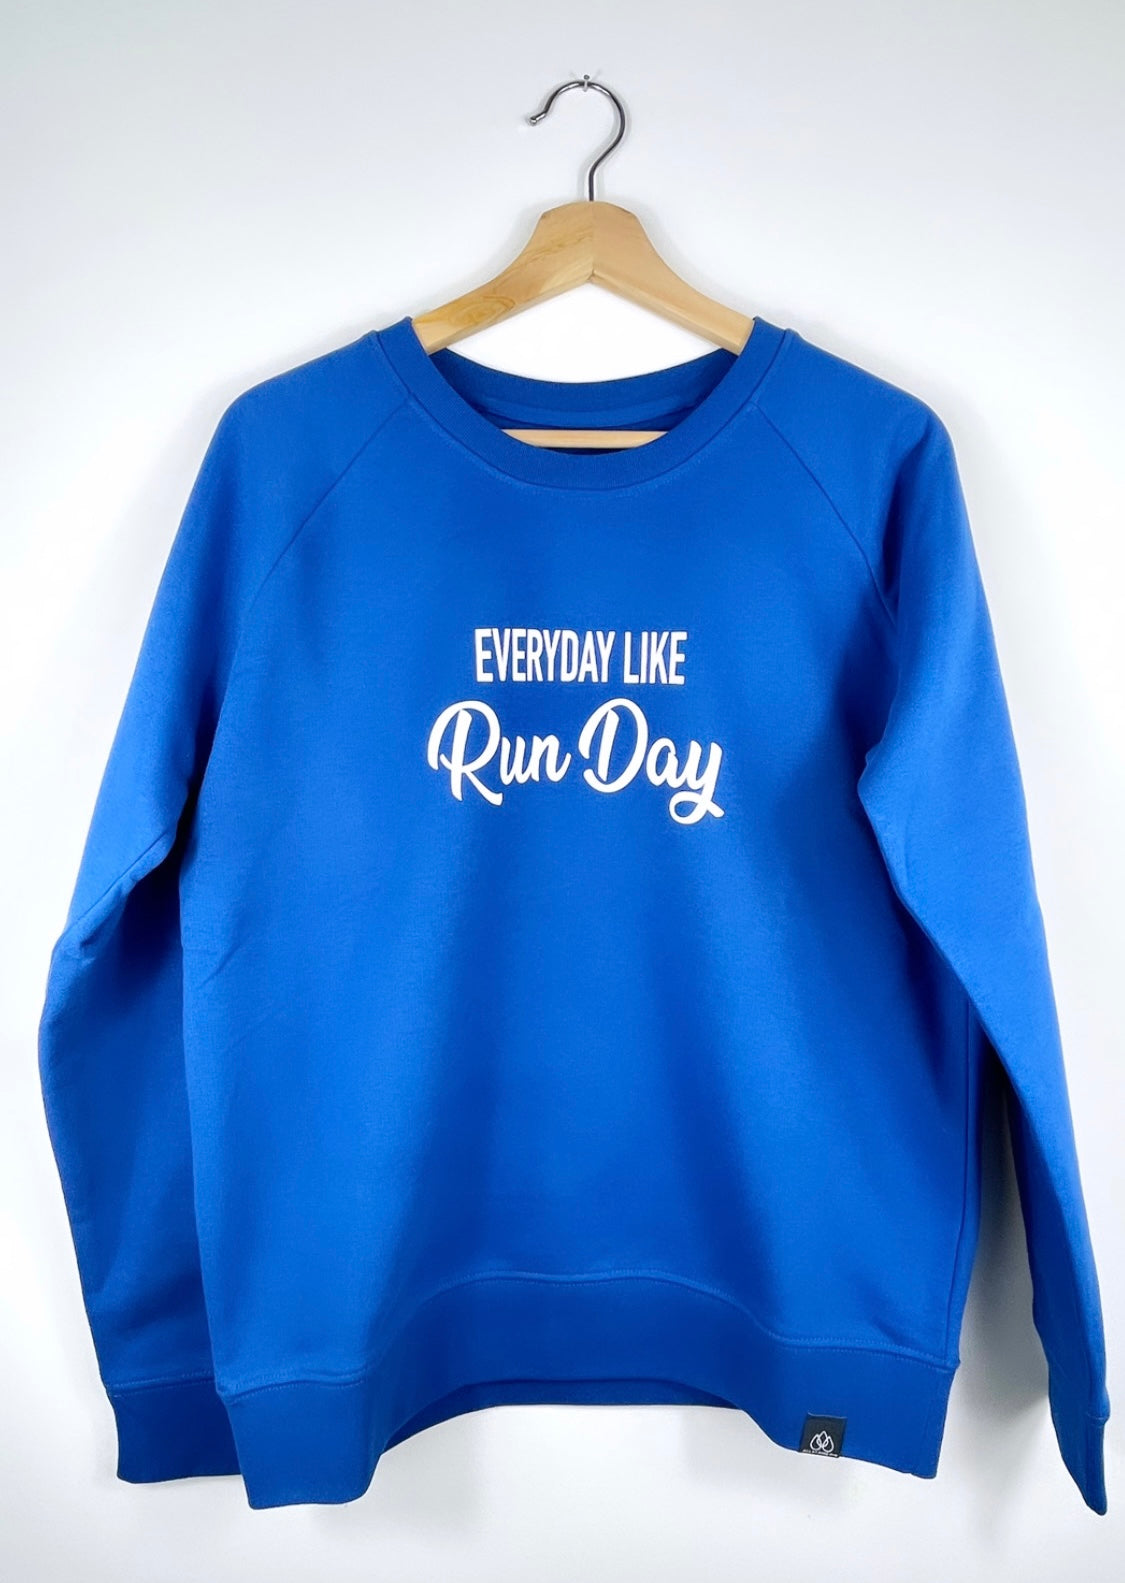 Everyday like Run Day Sweater Gr. M | Loopback by Allstridesin